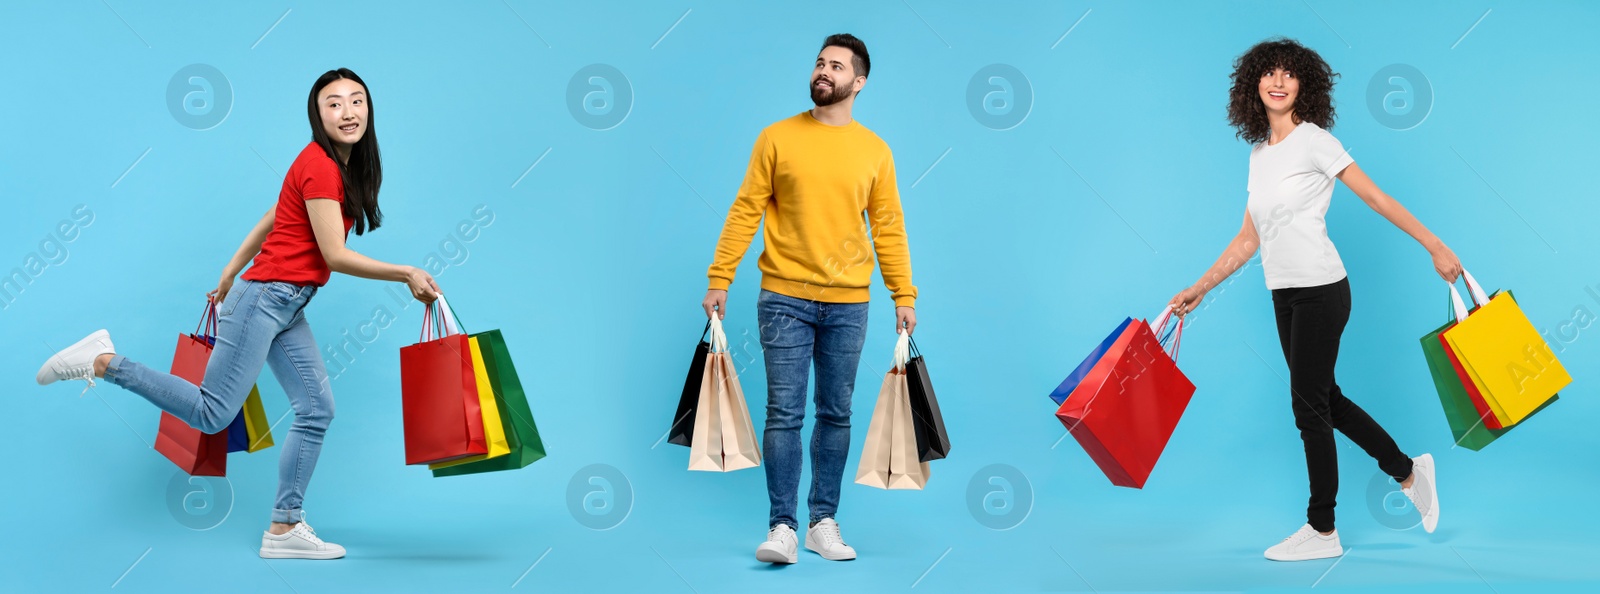 Image of Happy people with shopping bags on light blue background, set with photos